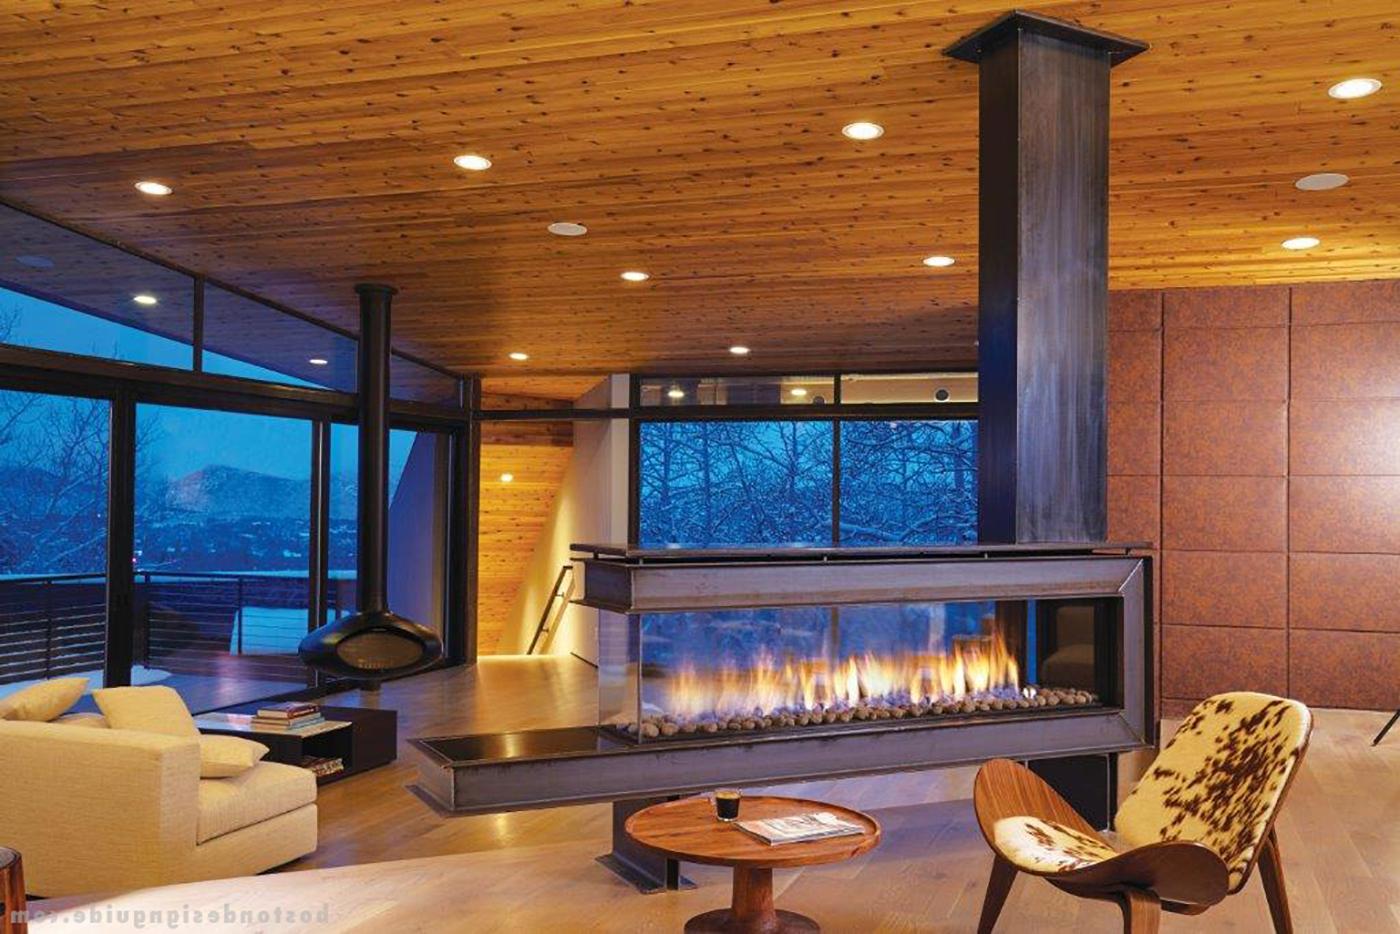 See-through glass fireplace